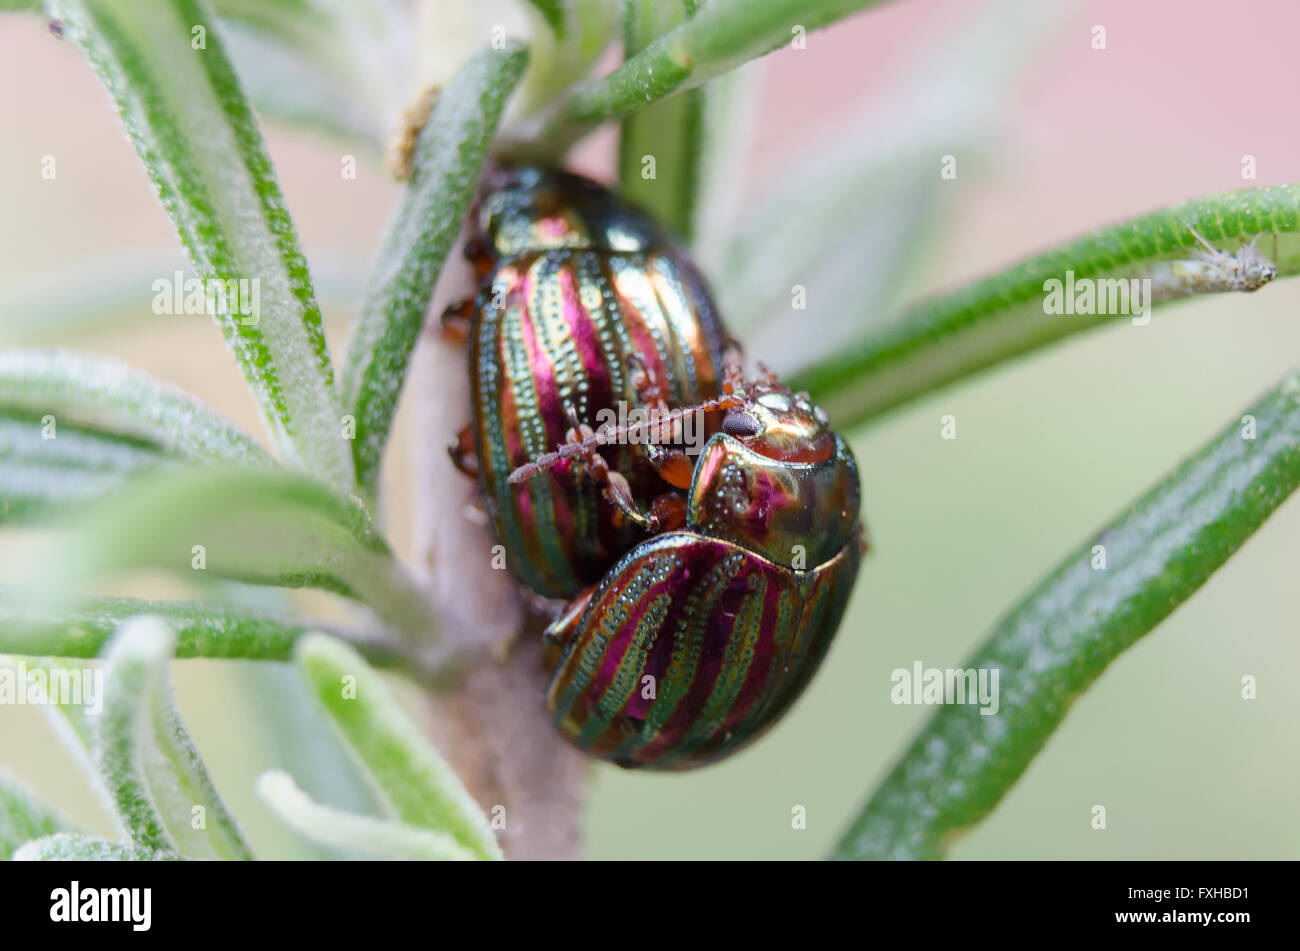 Two rosemary leaf beetles (Chrysolina Americana) mating on a rosemary sprig. Stock Photo